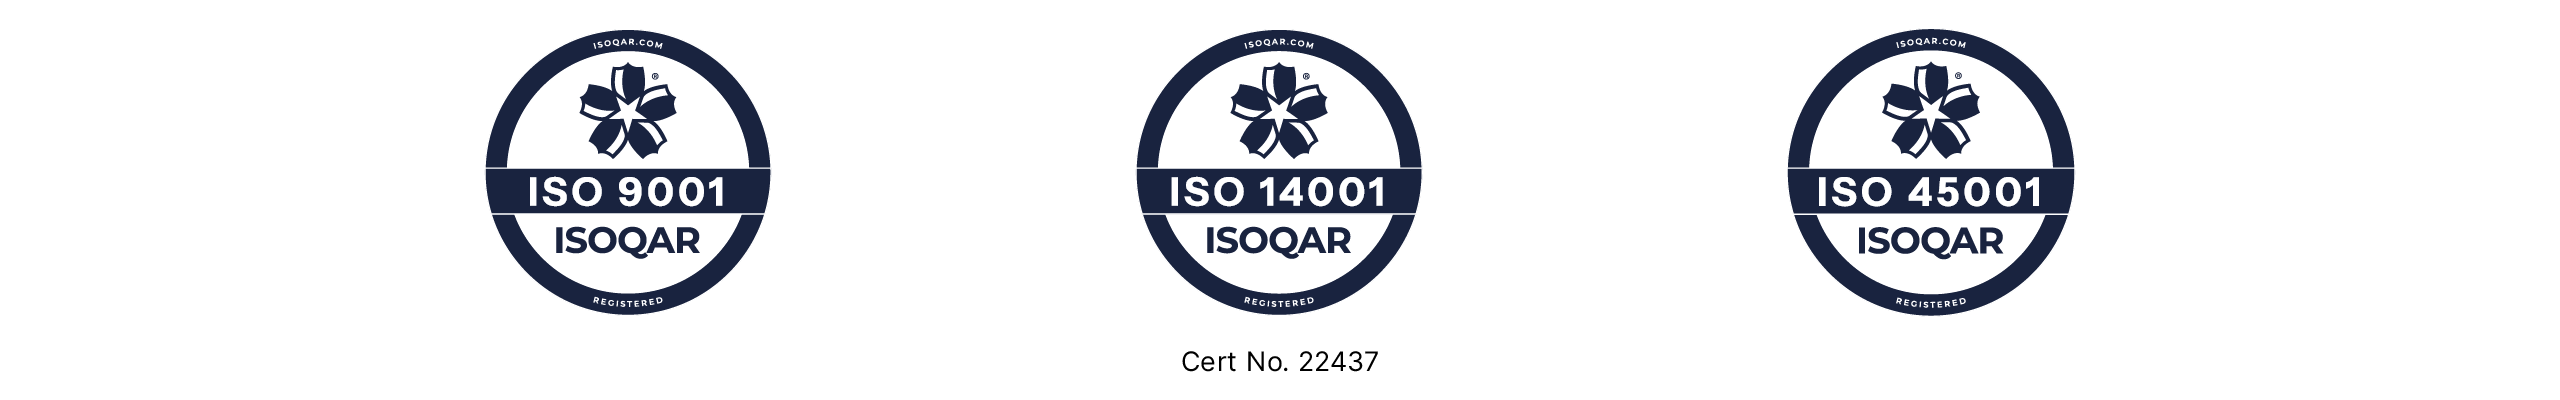 ISO certifications logos - ISO 9001 quality management, ISO 14001 environmental management and ISO 45001 health and safety management - awarded to Flexeserve